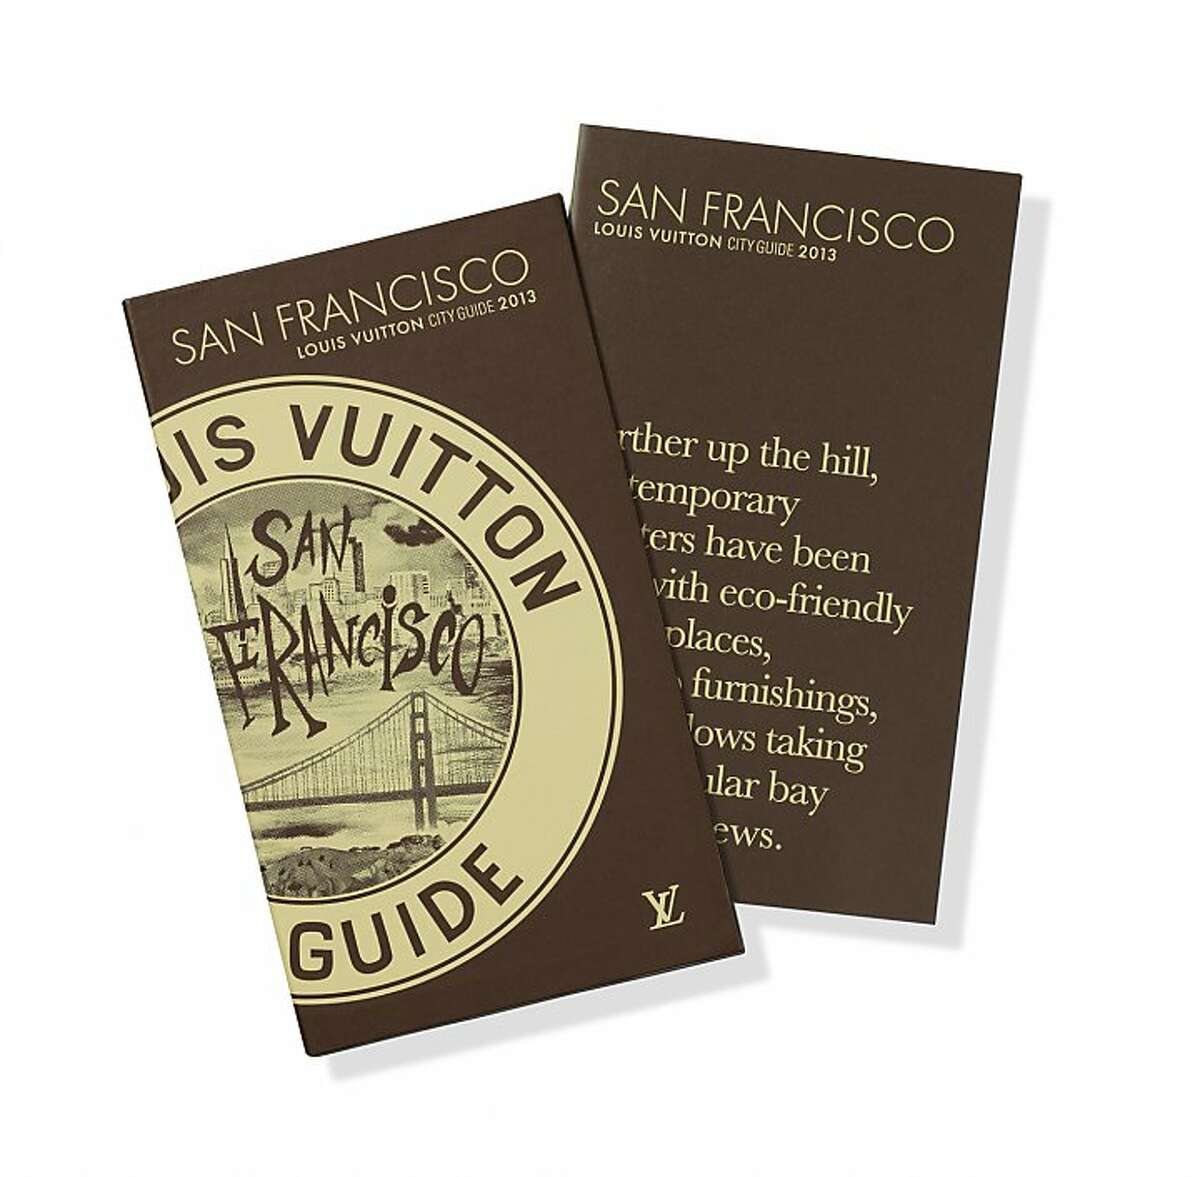 The San Francisco Coty Guide is the latest addition to the Louis Vuitton collection. It will be available Oct. 15, 2012.